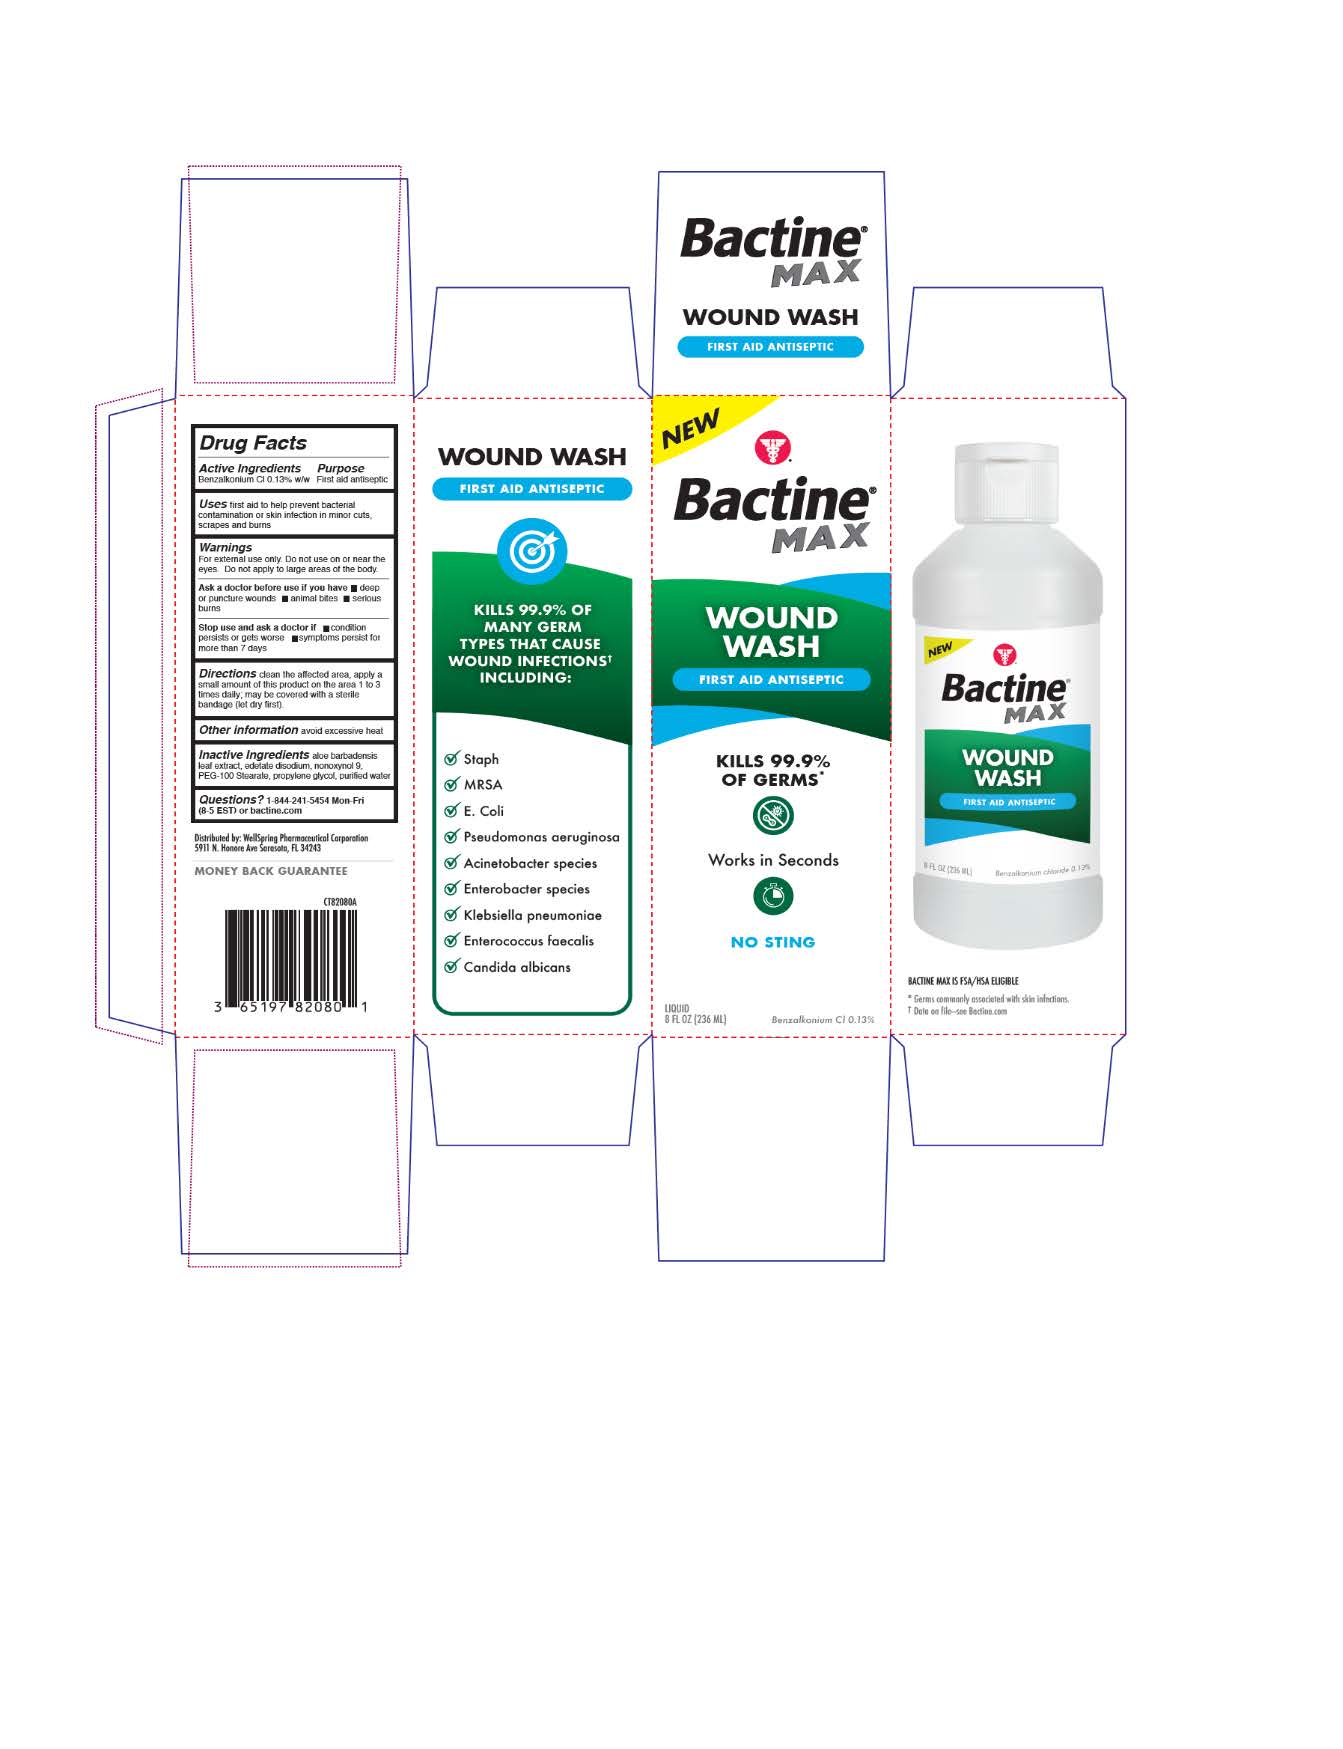 Bactine MAX First Aid Antiseptic Wound Wash - Bactine